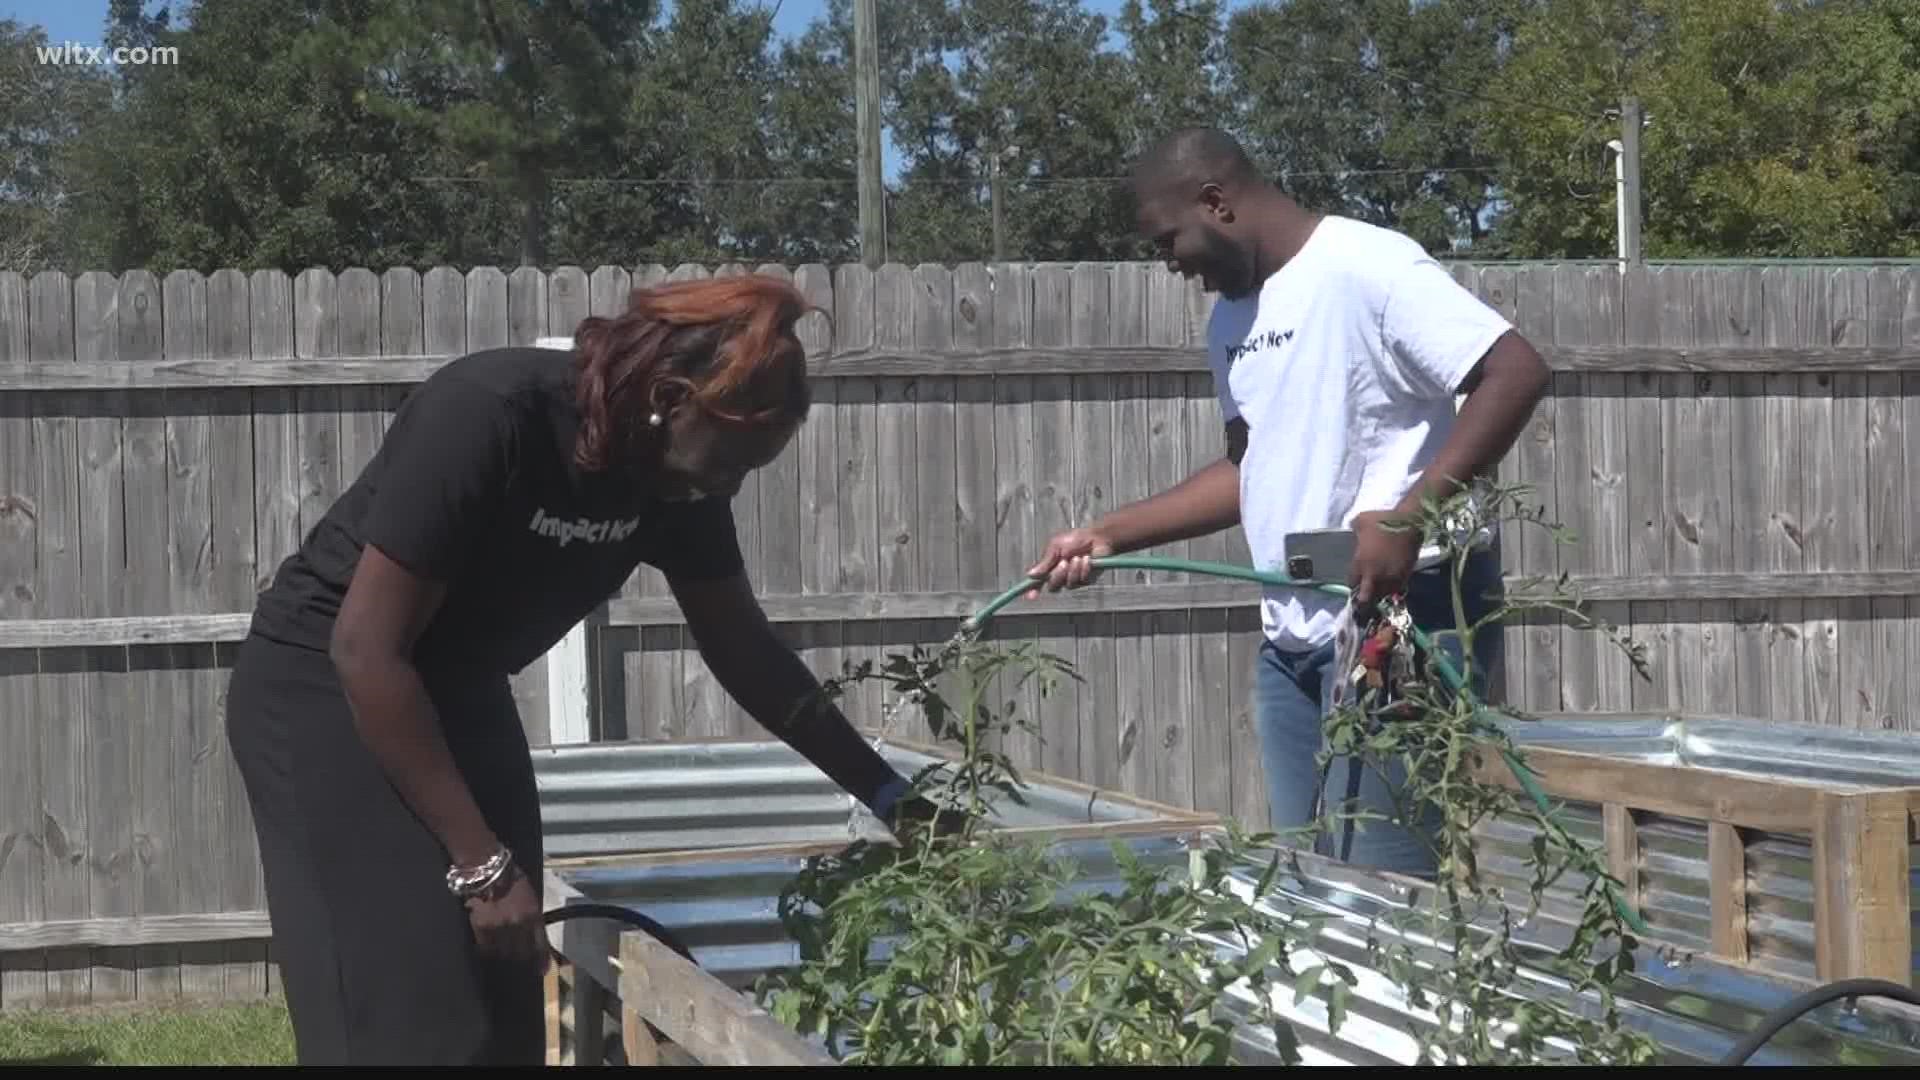 A few groups in Orangeburg have gotten together to produce a community garden.